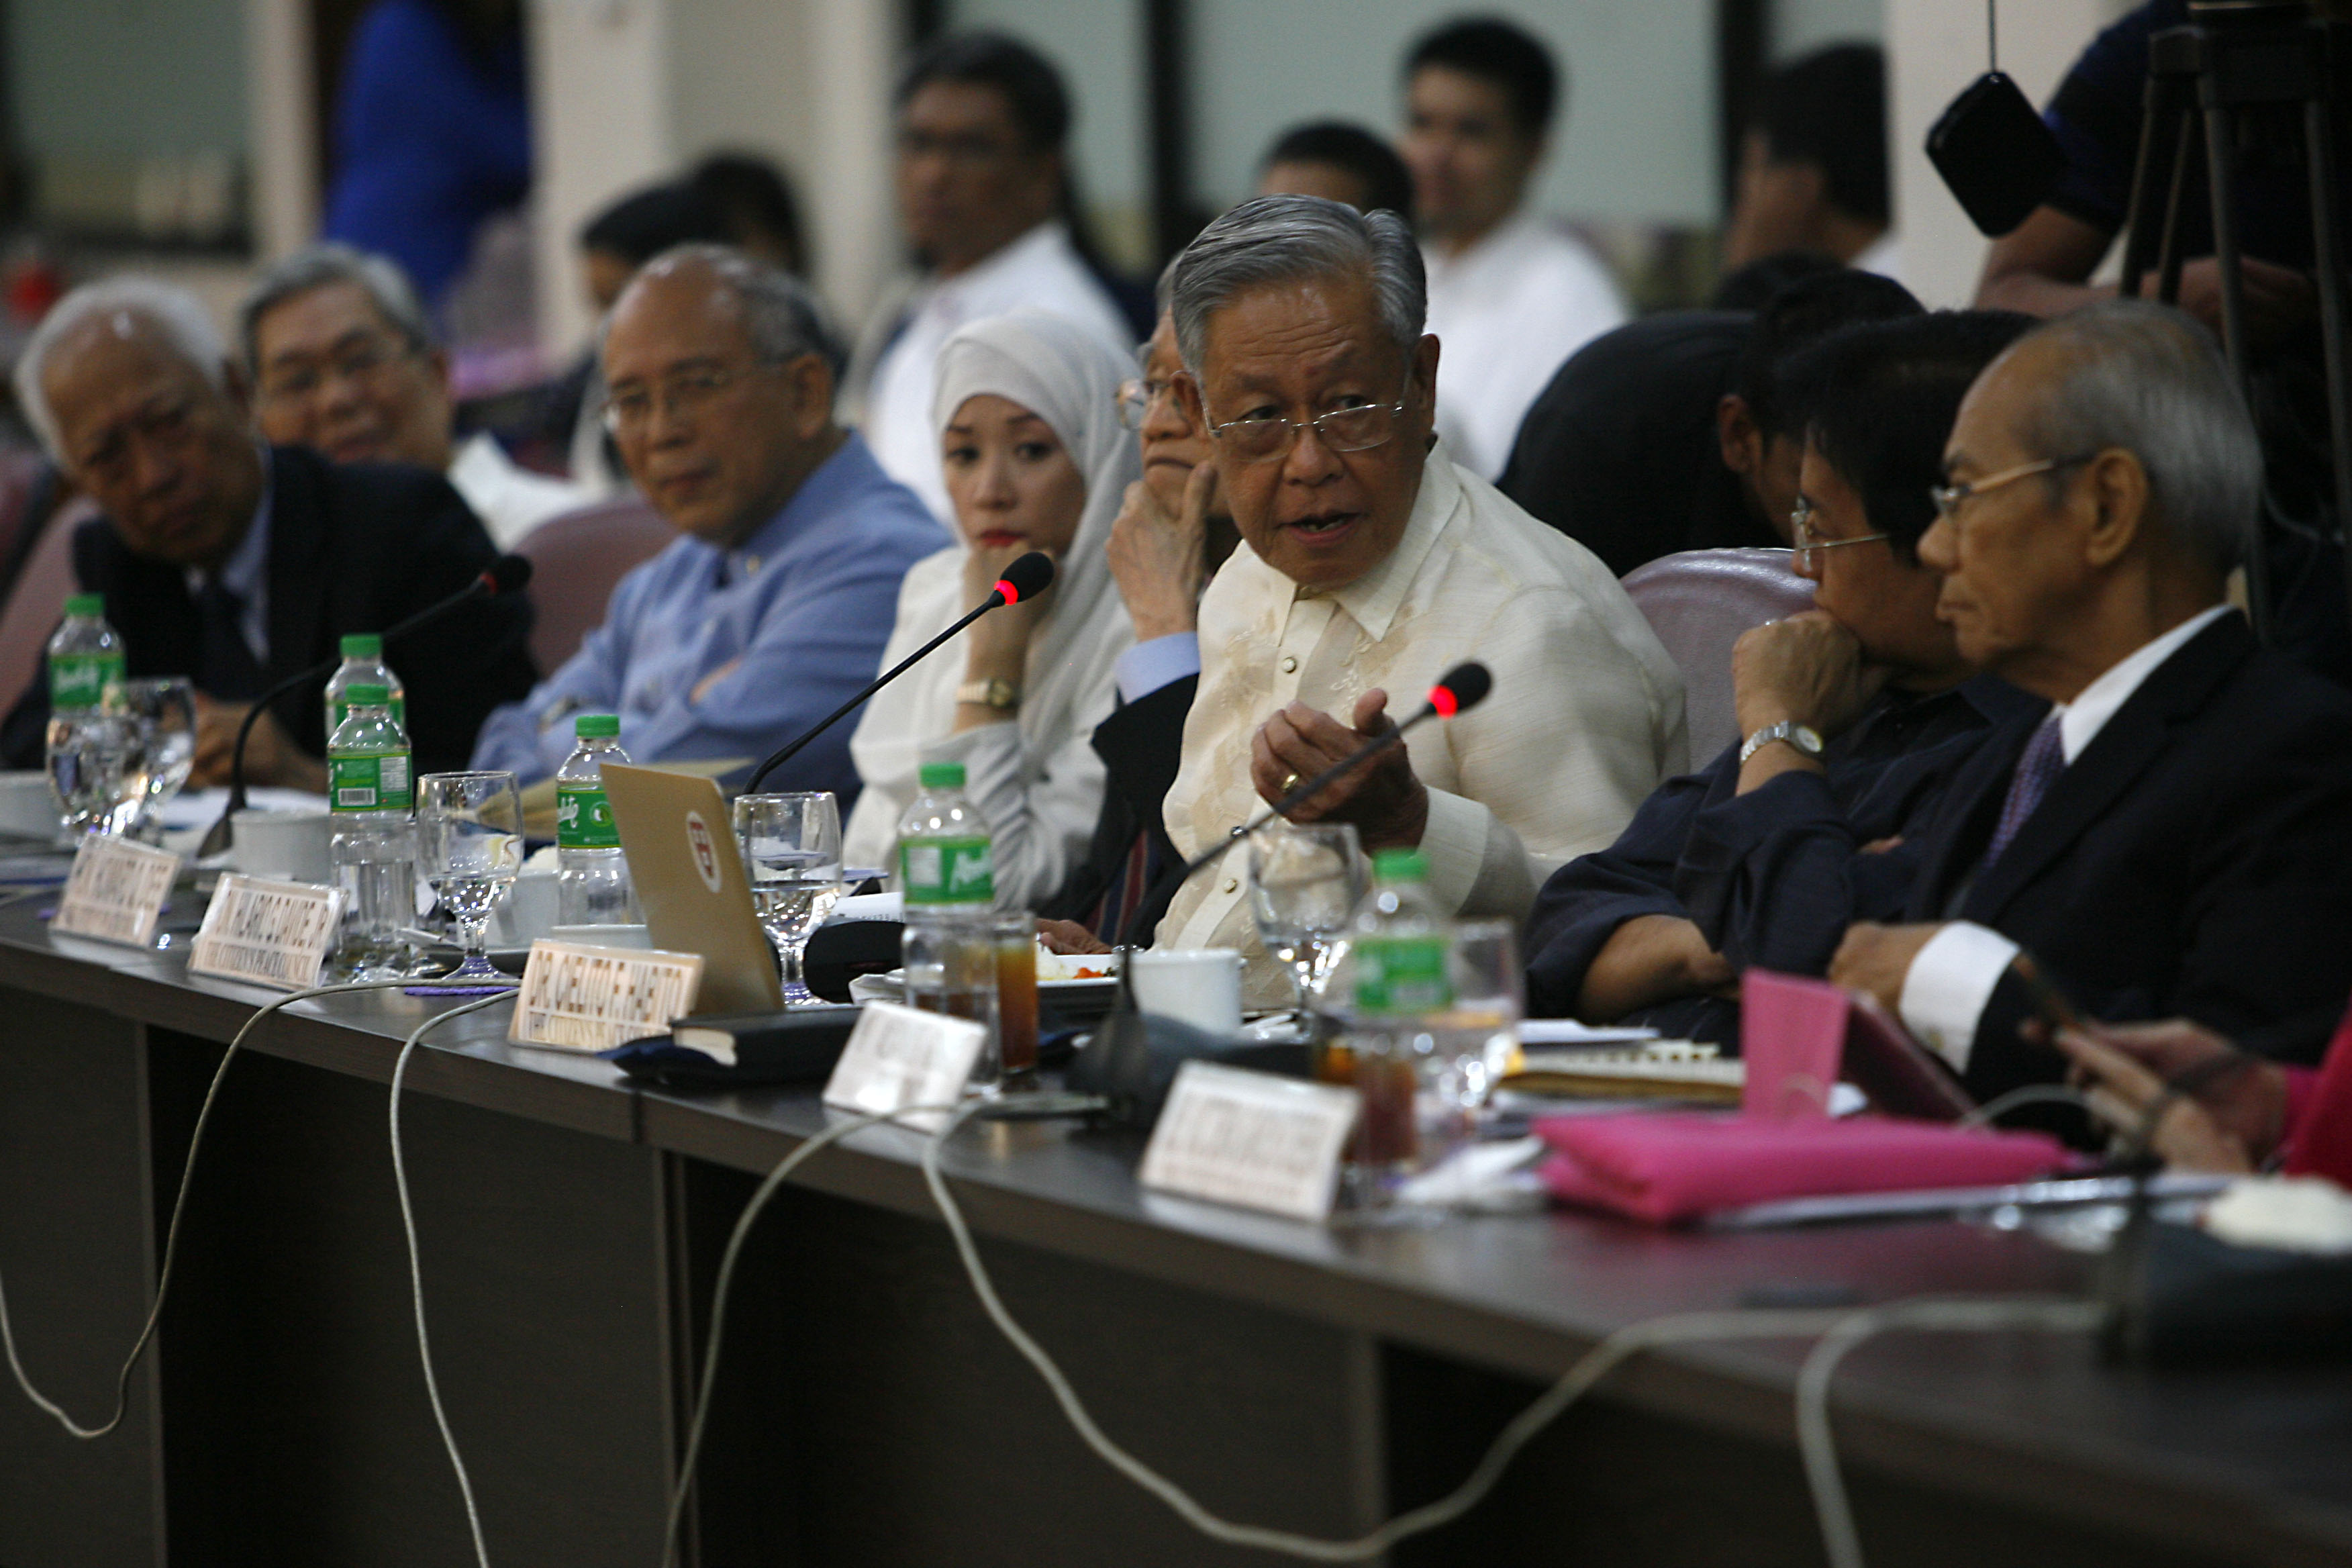 FULL REPORT. Former Chief Justice Hilario Davide Jr. and other members of the Citizen's Peace Council face lawmakers during the final public hearing for the proposed Bangsamoro Basic Law at the House of Representatives in Quezon City on April 27, 2015.  